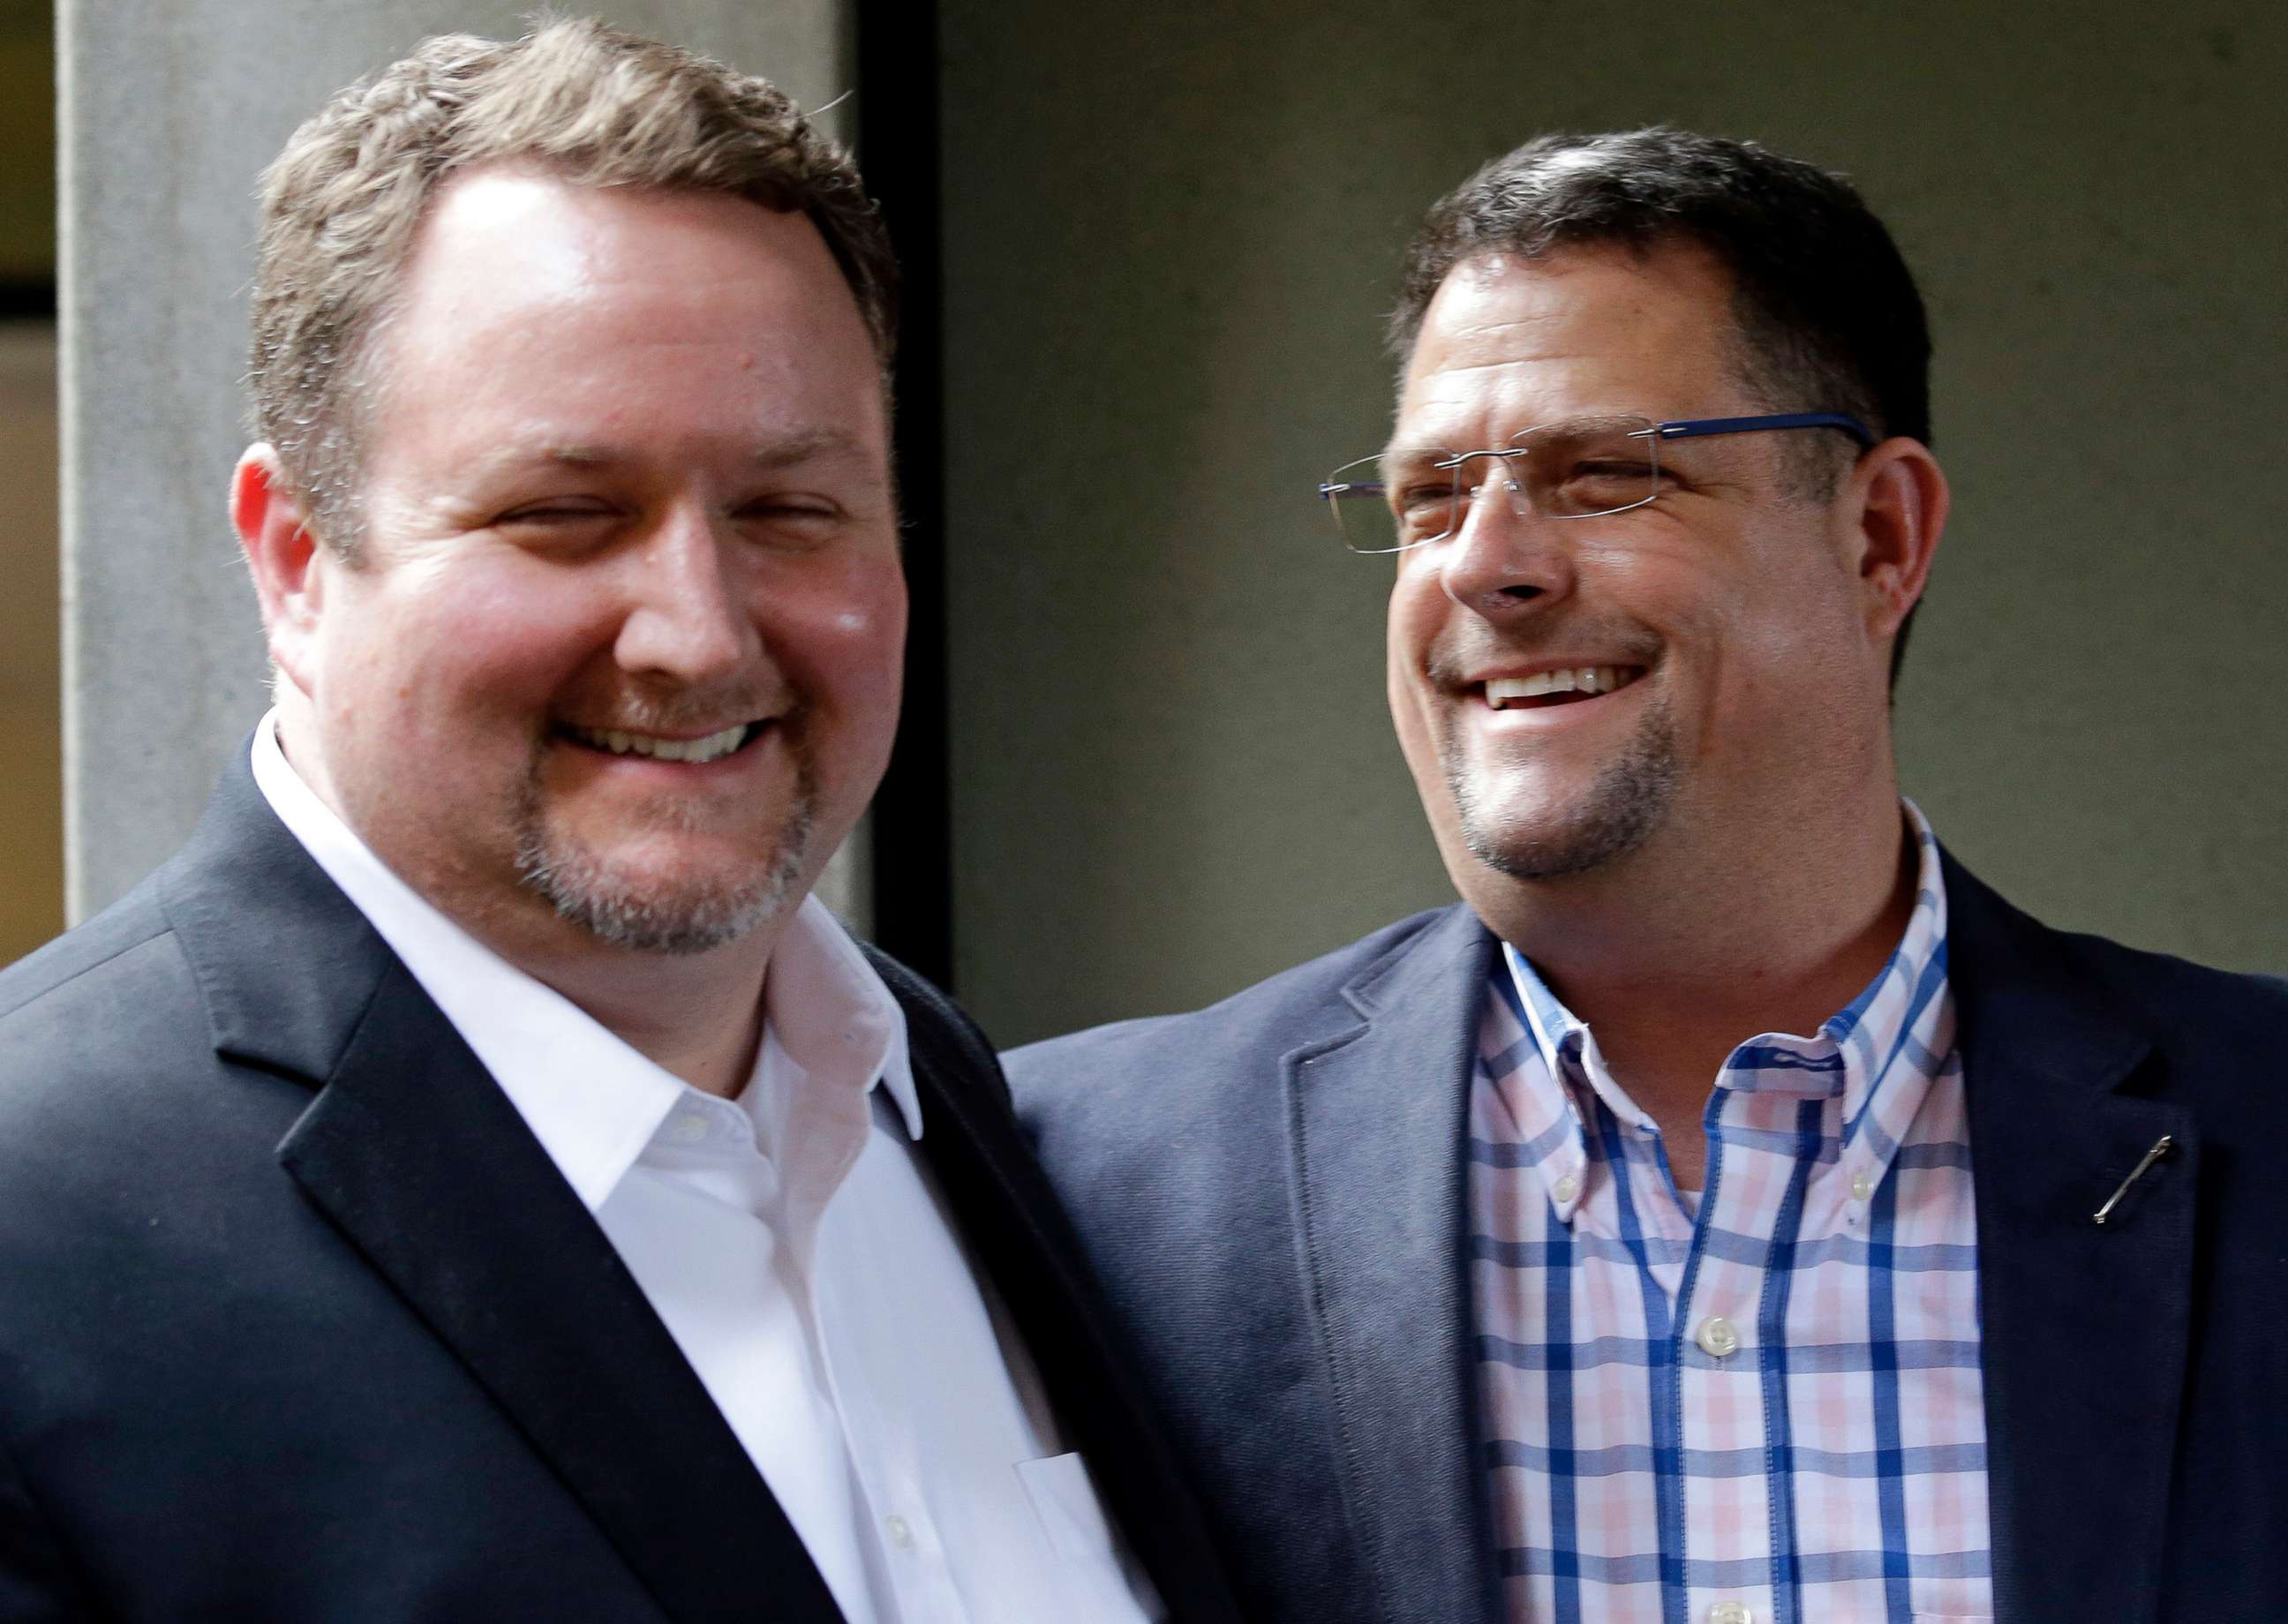 PHOTO: Curt Freed, left, and his husband Robert Ingersoll, the couple who sued florist Barronelle Stutzman for refusing to provide services for their wedding, smile after a hearing before Washington's Supreme Court in Bellevue, Wash., Nov. 15, 2016.